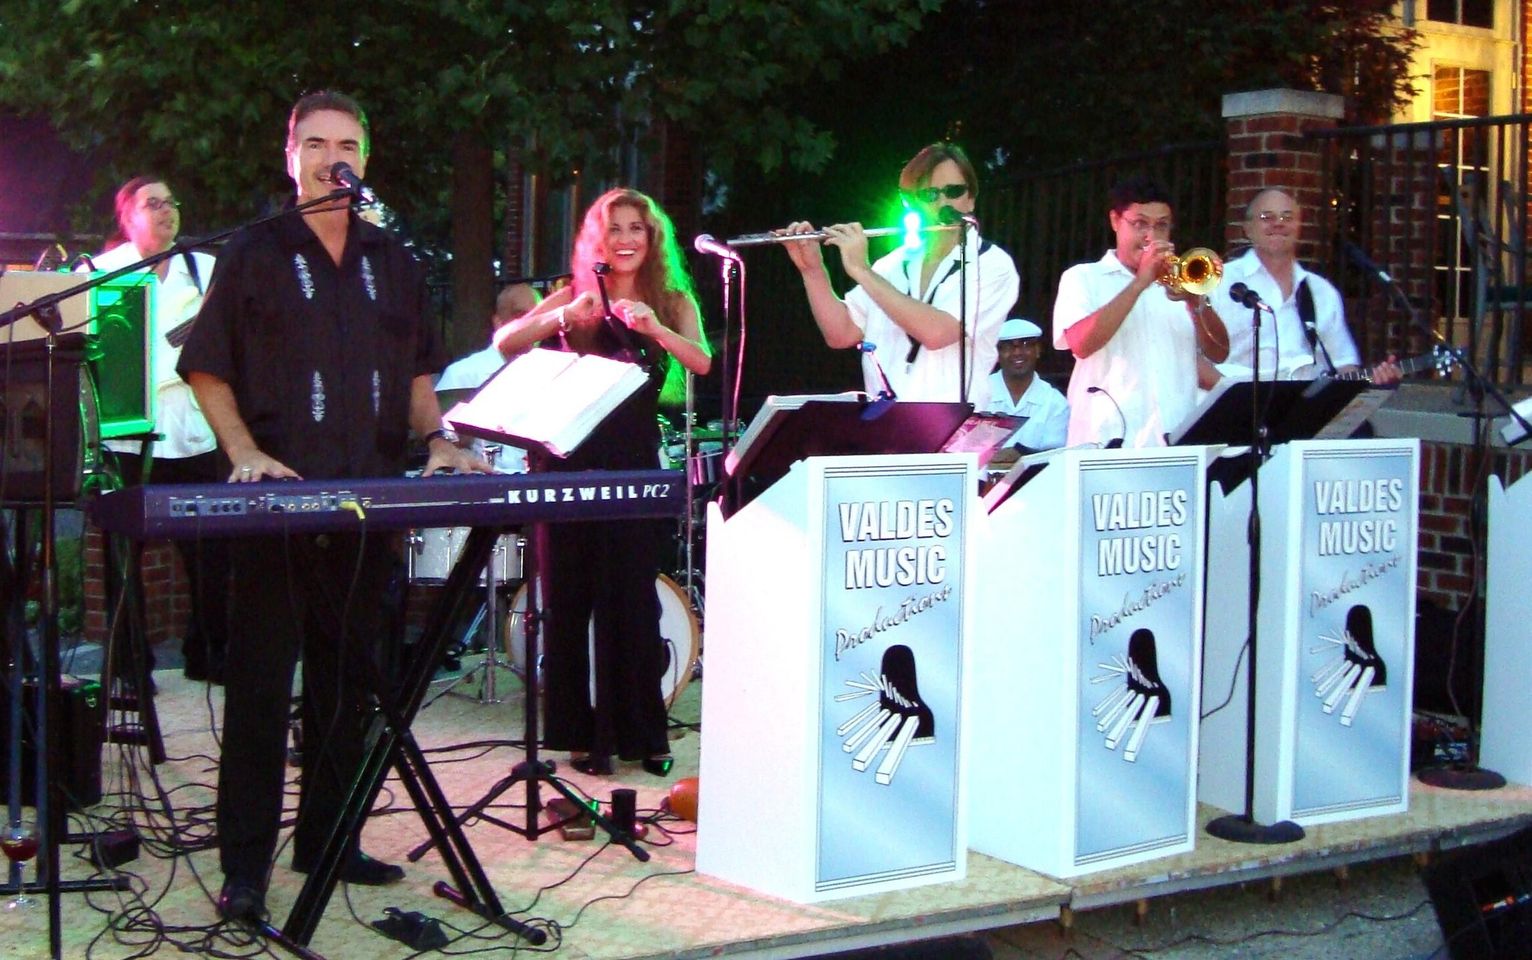 Concert in the Park - Jose Valdes & Mambo All Stars